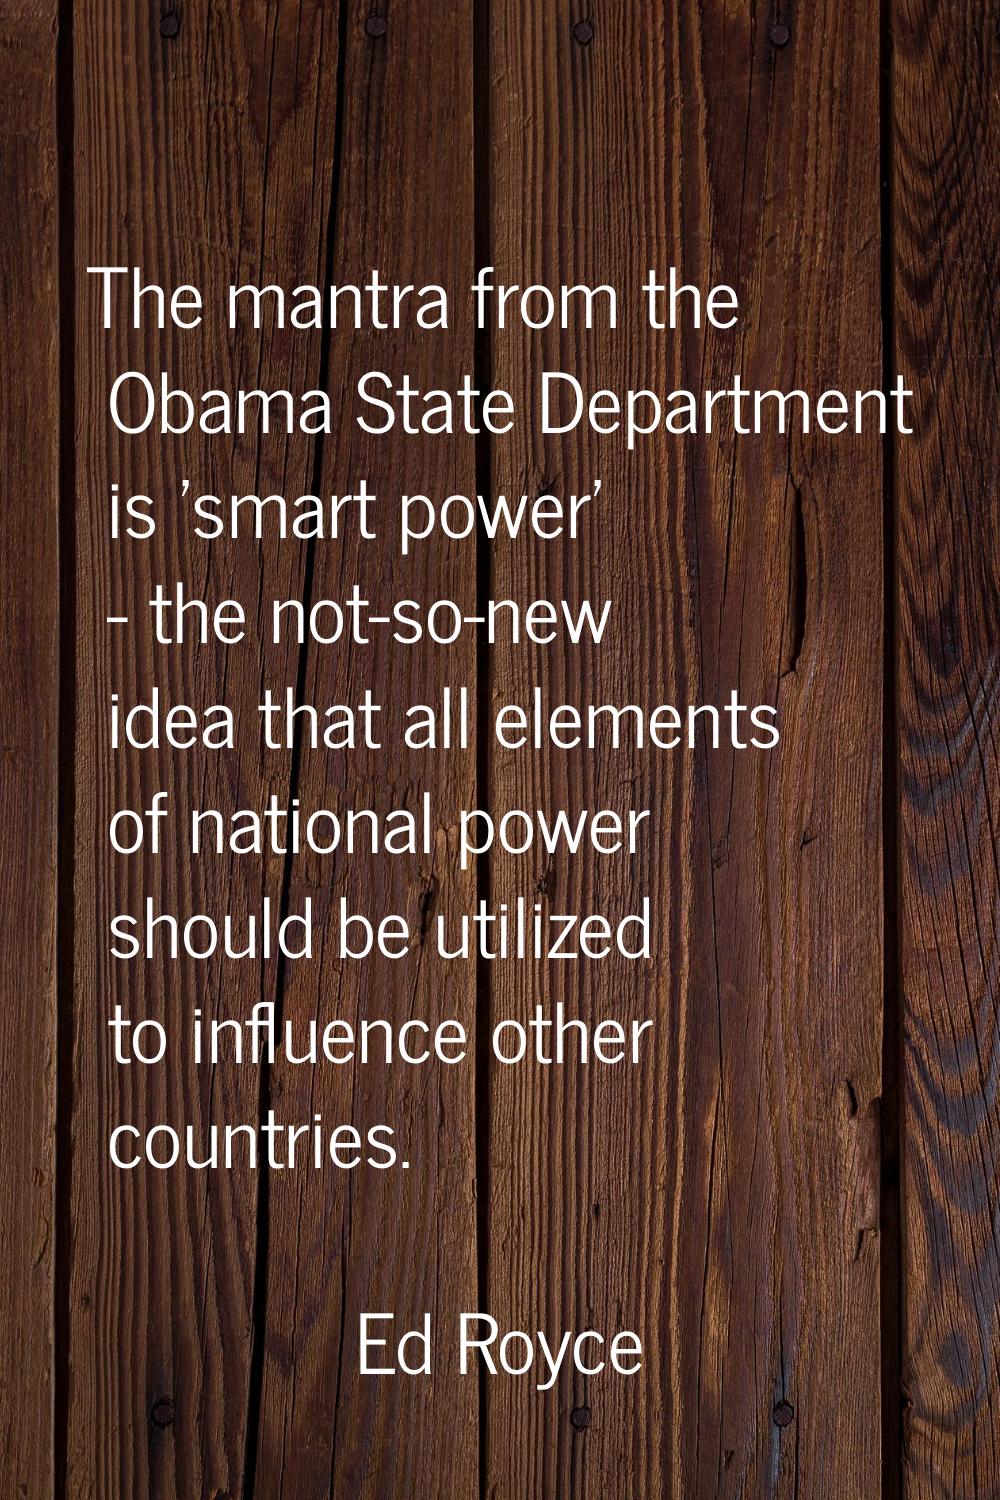 The mantra from the Obama State Department is 'smart power' - the not-so-new idea that all elements